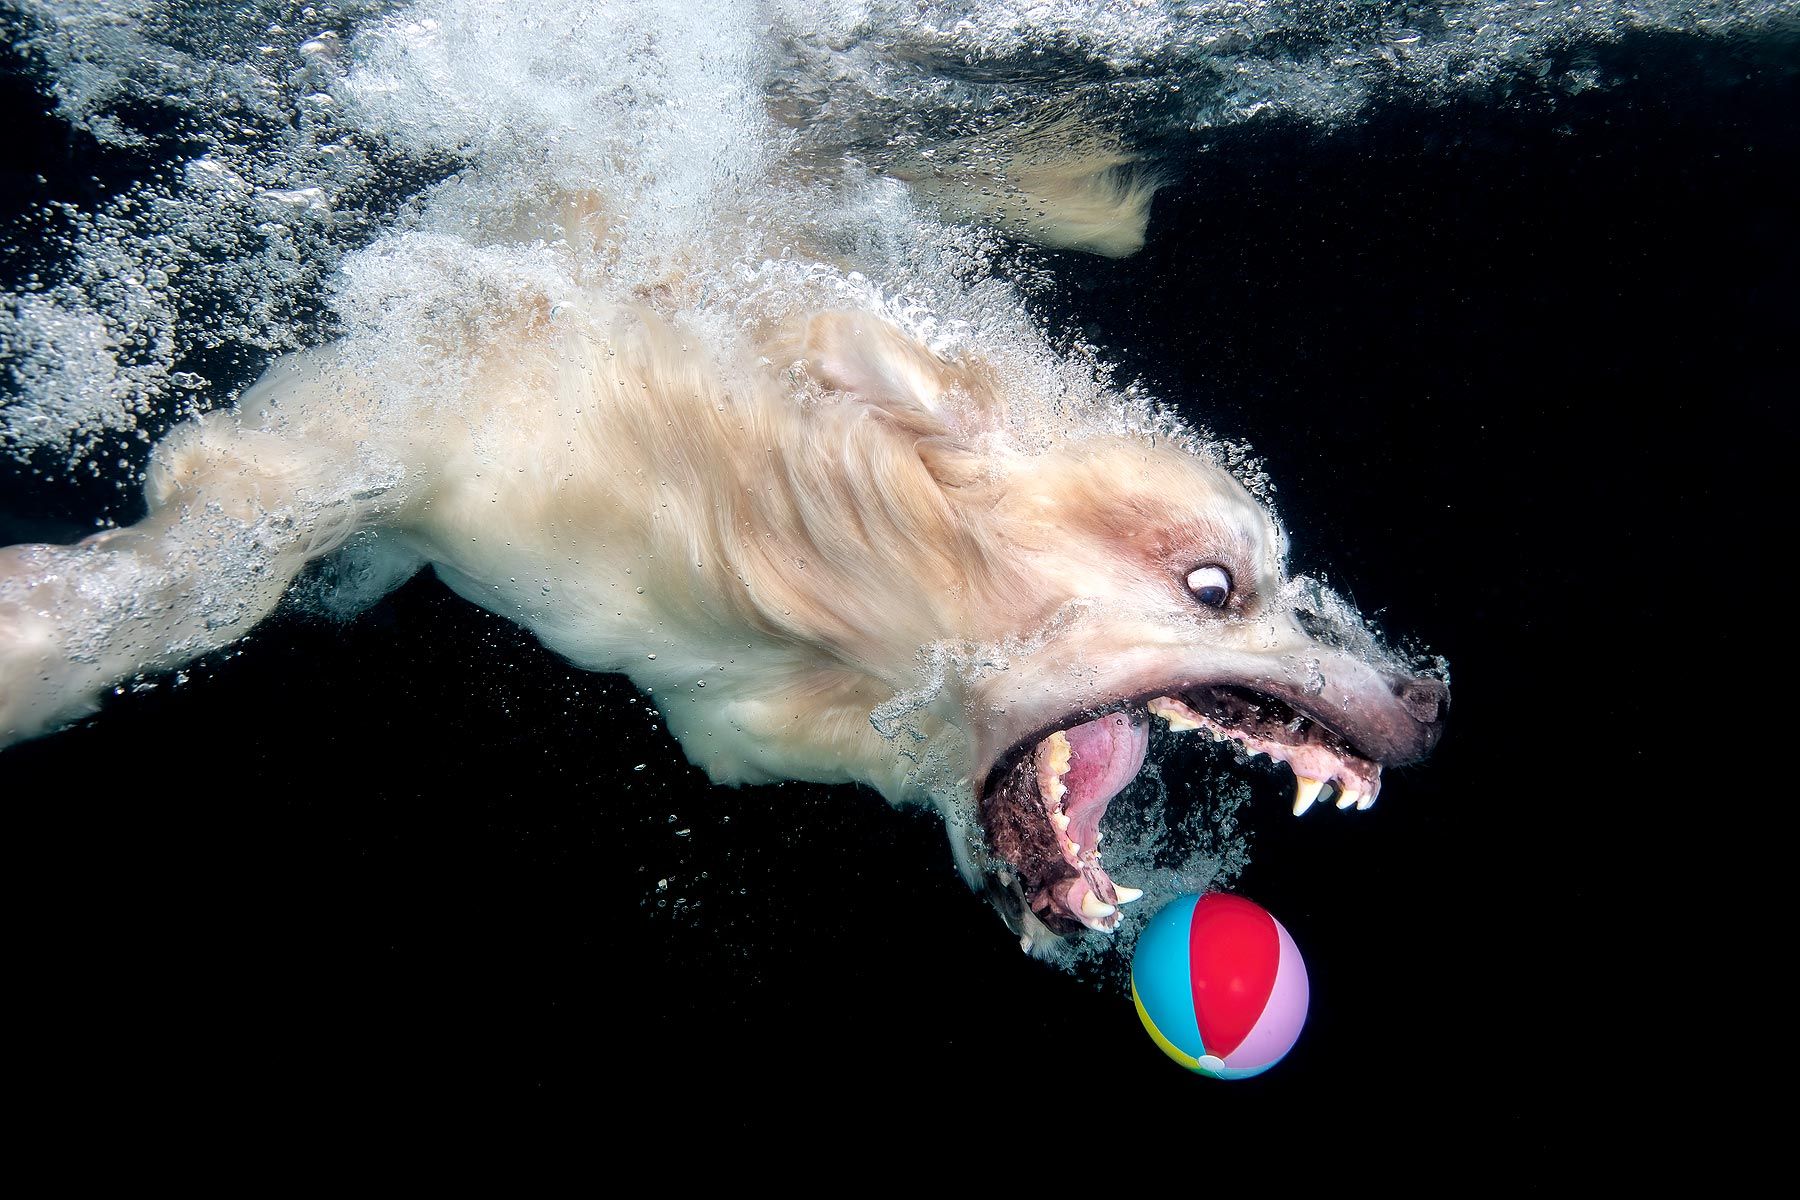 Clemens Vanderwerf_Golden retriever diving after colorful ball